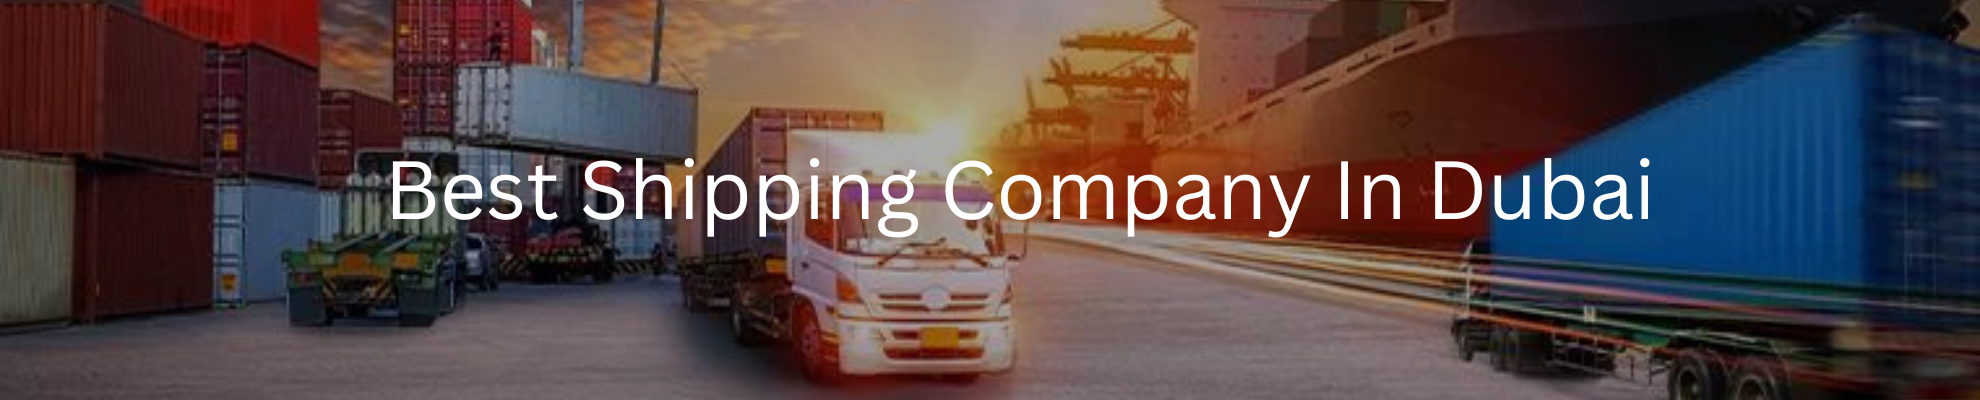 Best Shipping Company In Dubai | Riseonic Shipping Lines